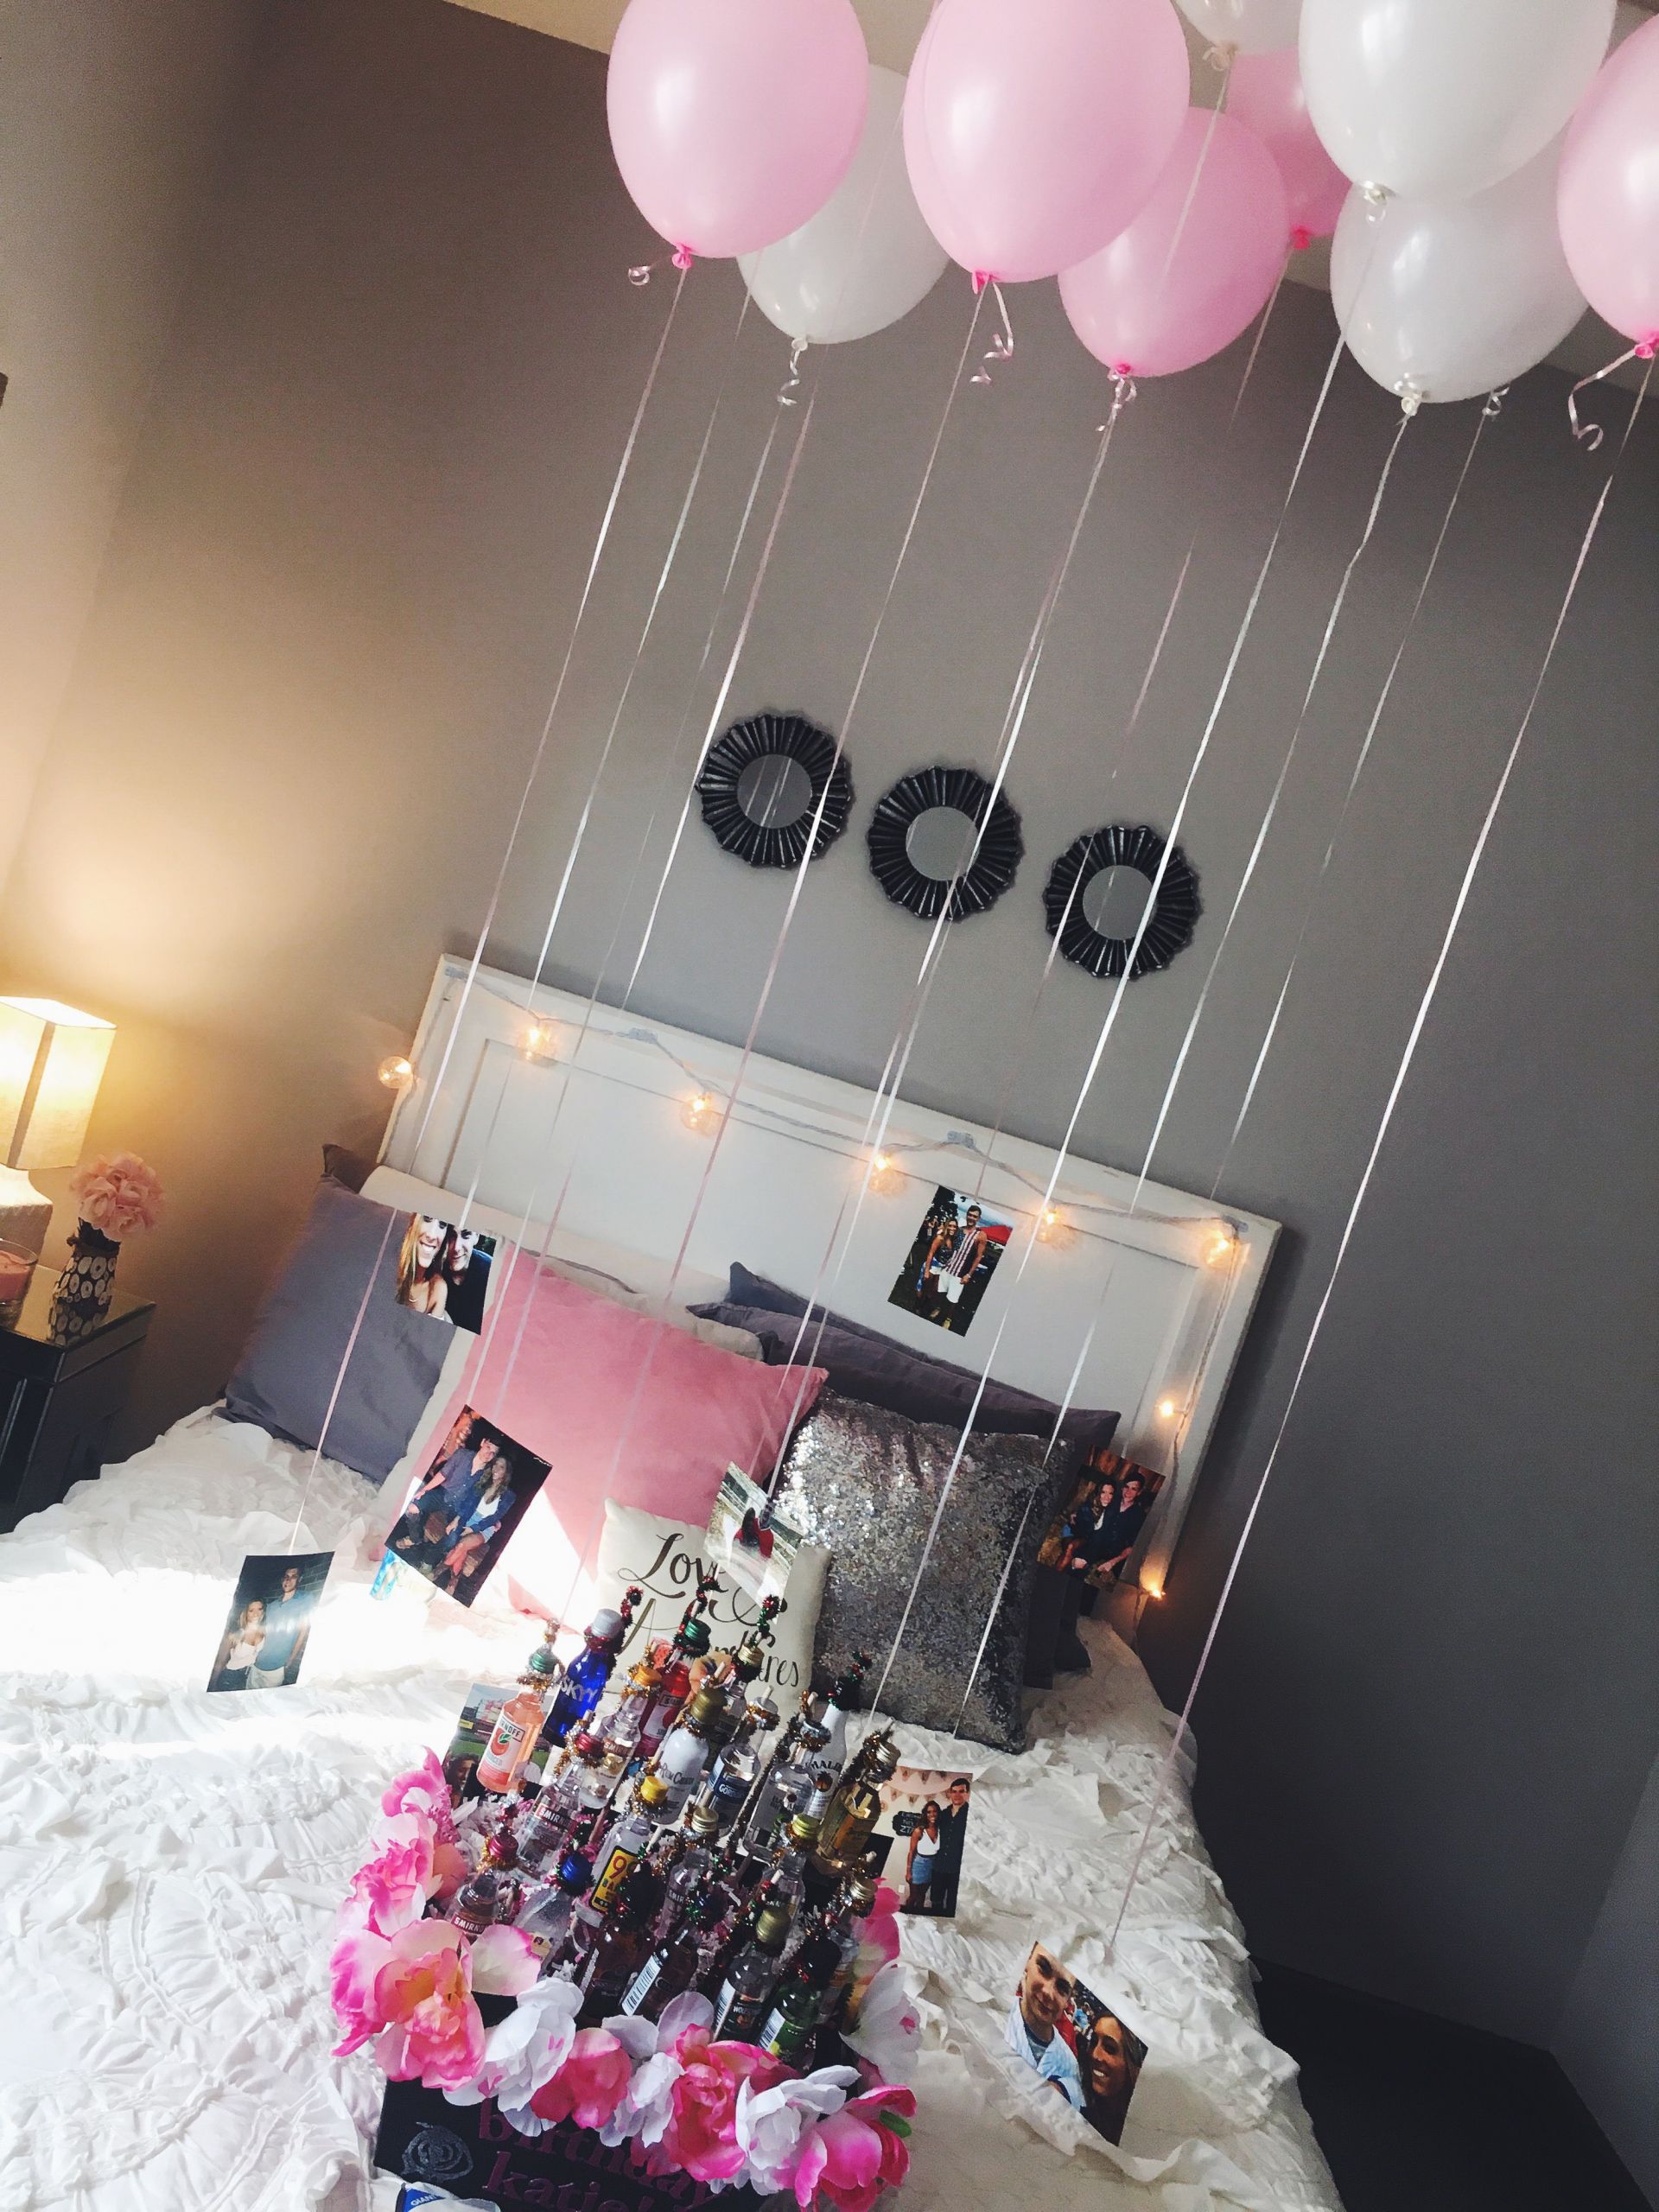 Best Birthday Gifts For Girlfriend
 easy and cute decorations for a friend or girlfriends 21st